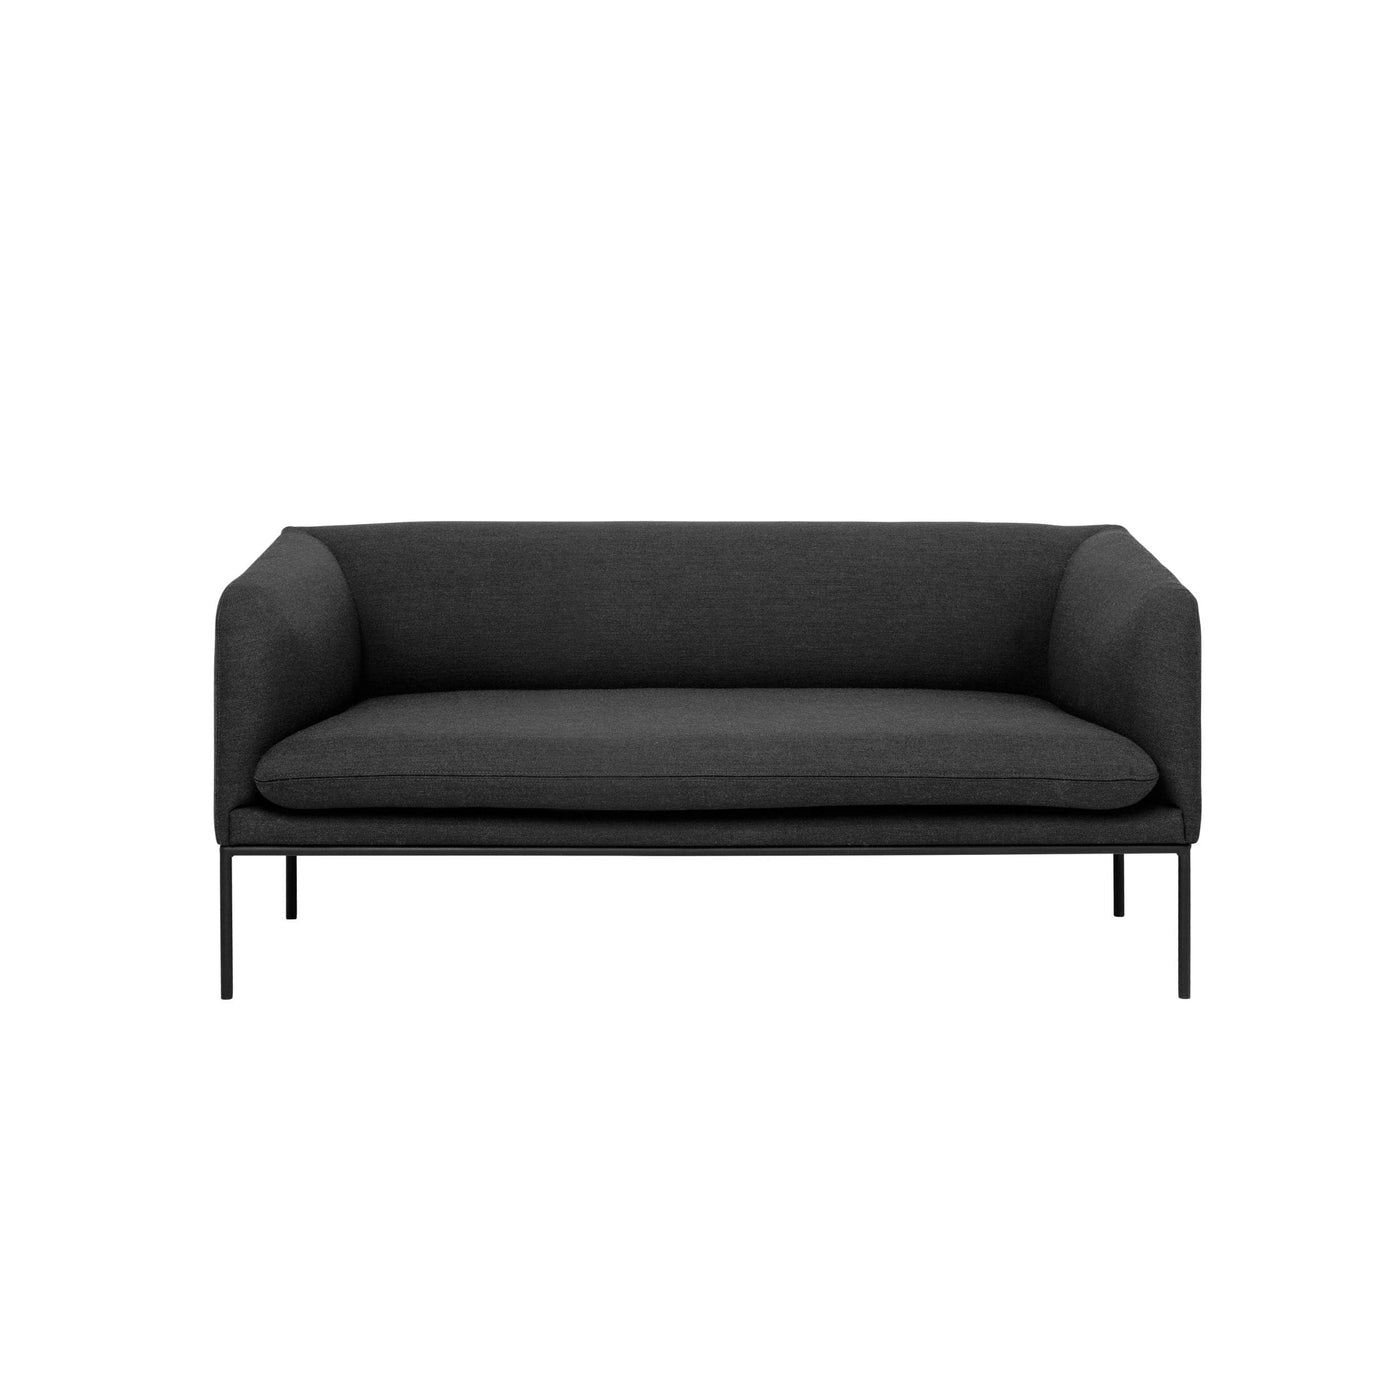 Ferm Living Turn sofa 2 seater, dark grey fiord by Kvadrat fabric. Made to order from someday designs. #colour_dark-grey-fiord-by-kvadrat